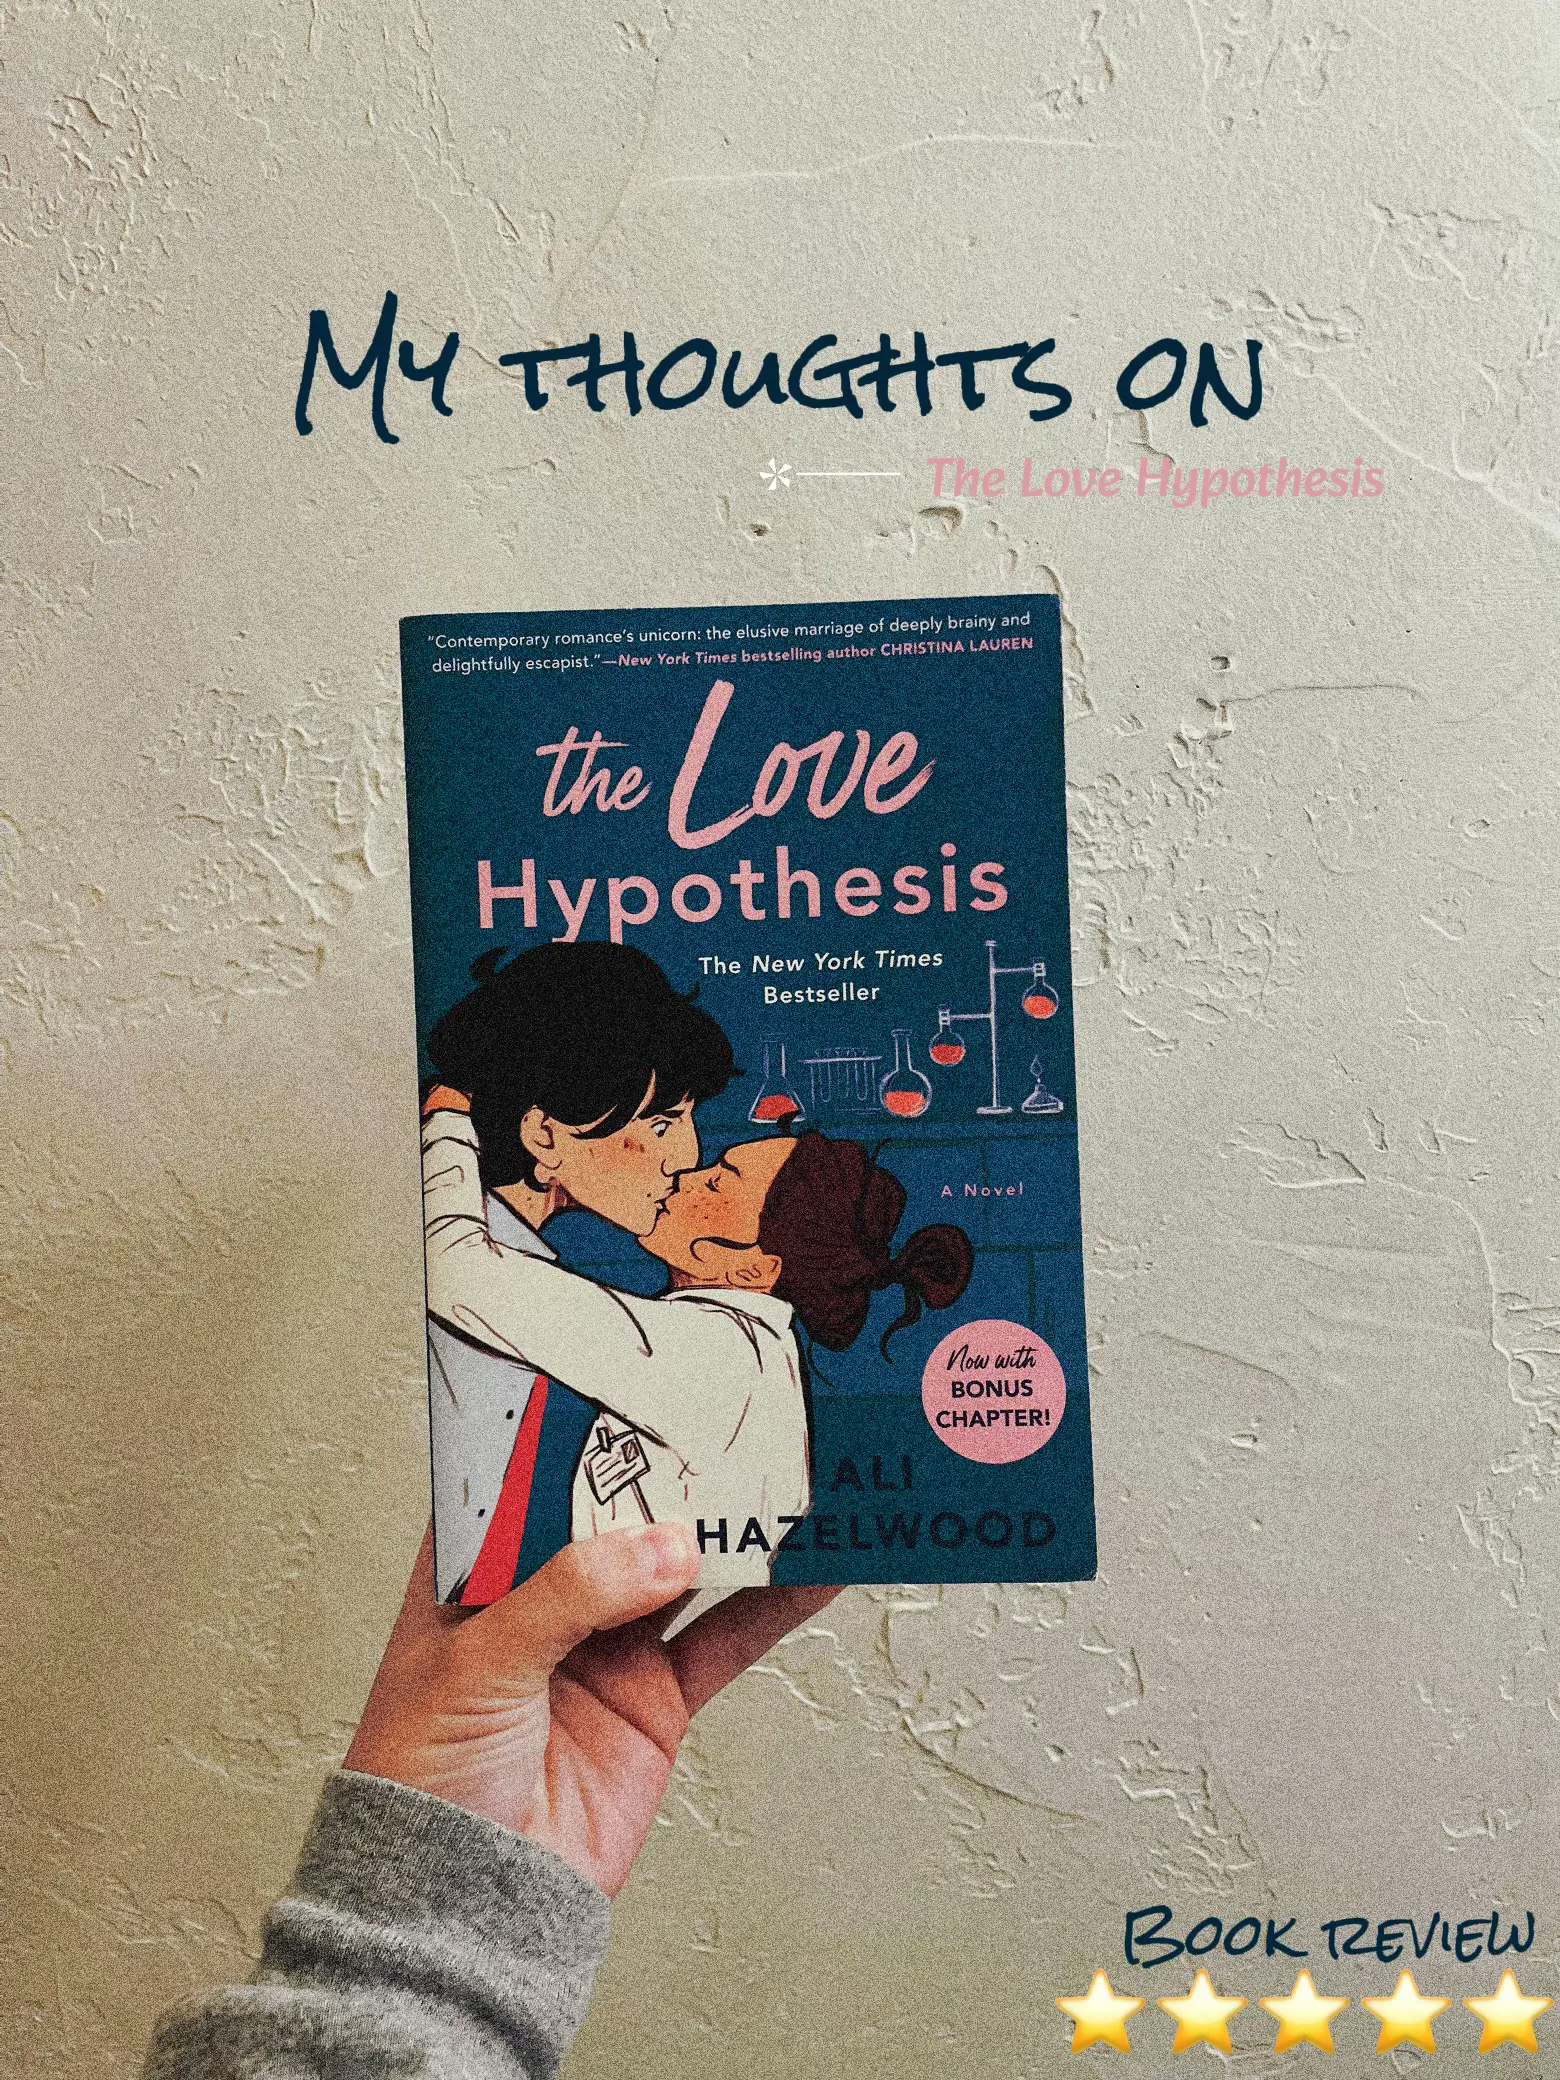 The Love Hypothesis by Ali Hazelwood - Lemon8 Search